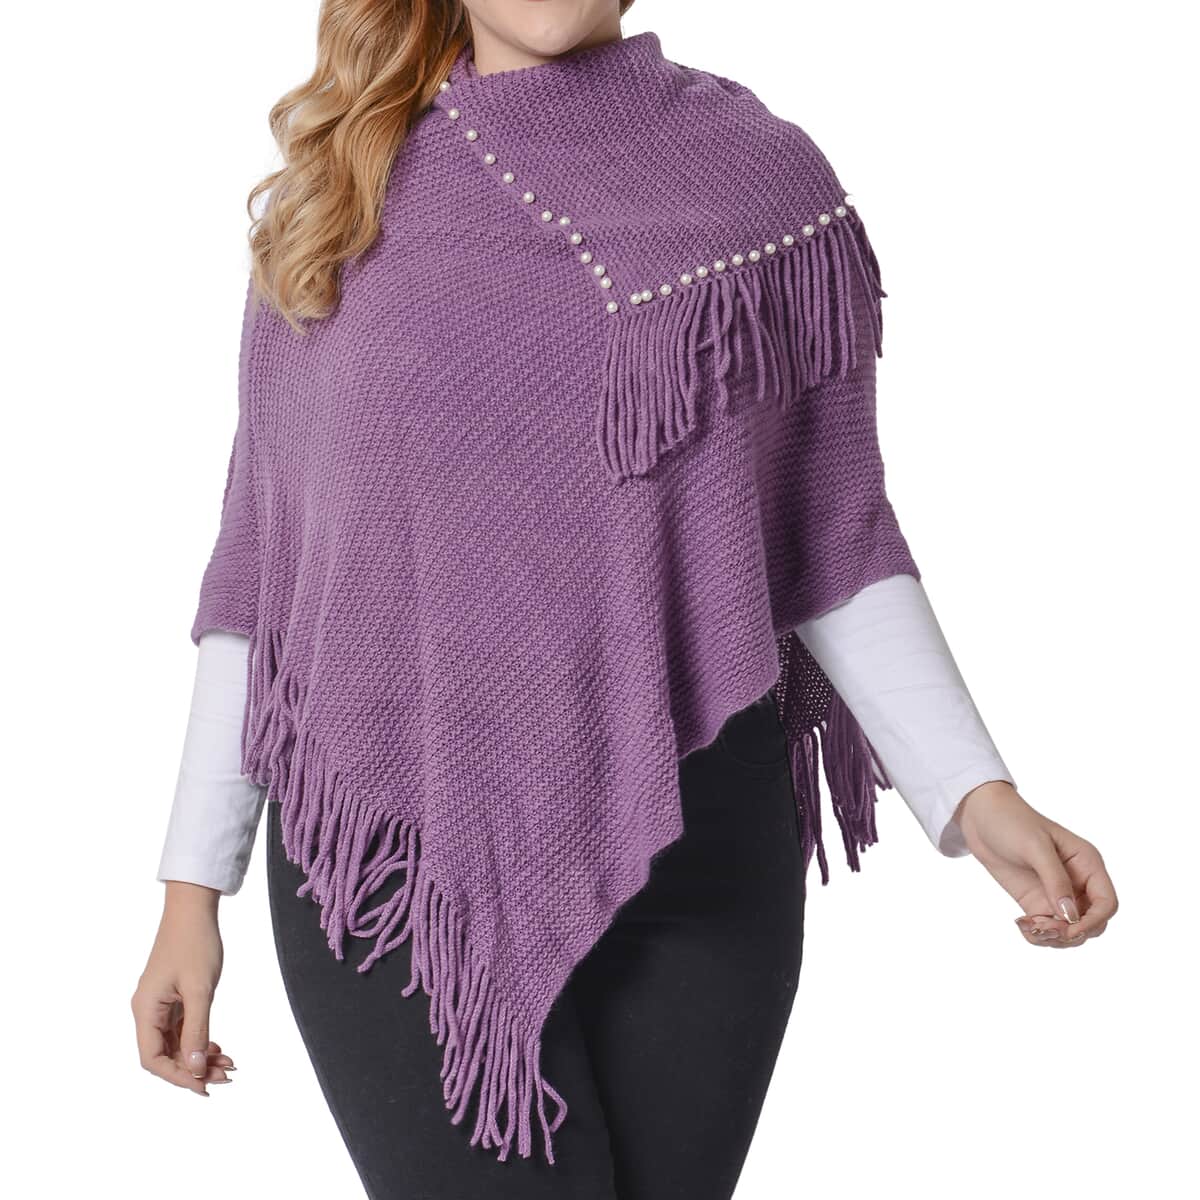 Mauve Cape Neck V-Shape Poncho with Pearls and Fringe Accent (One Size Fits Most, 100% Acrylic) image number 0